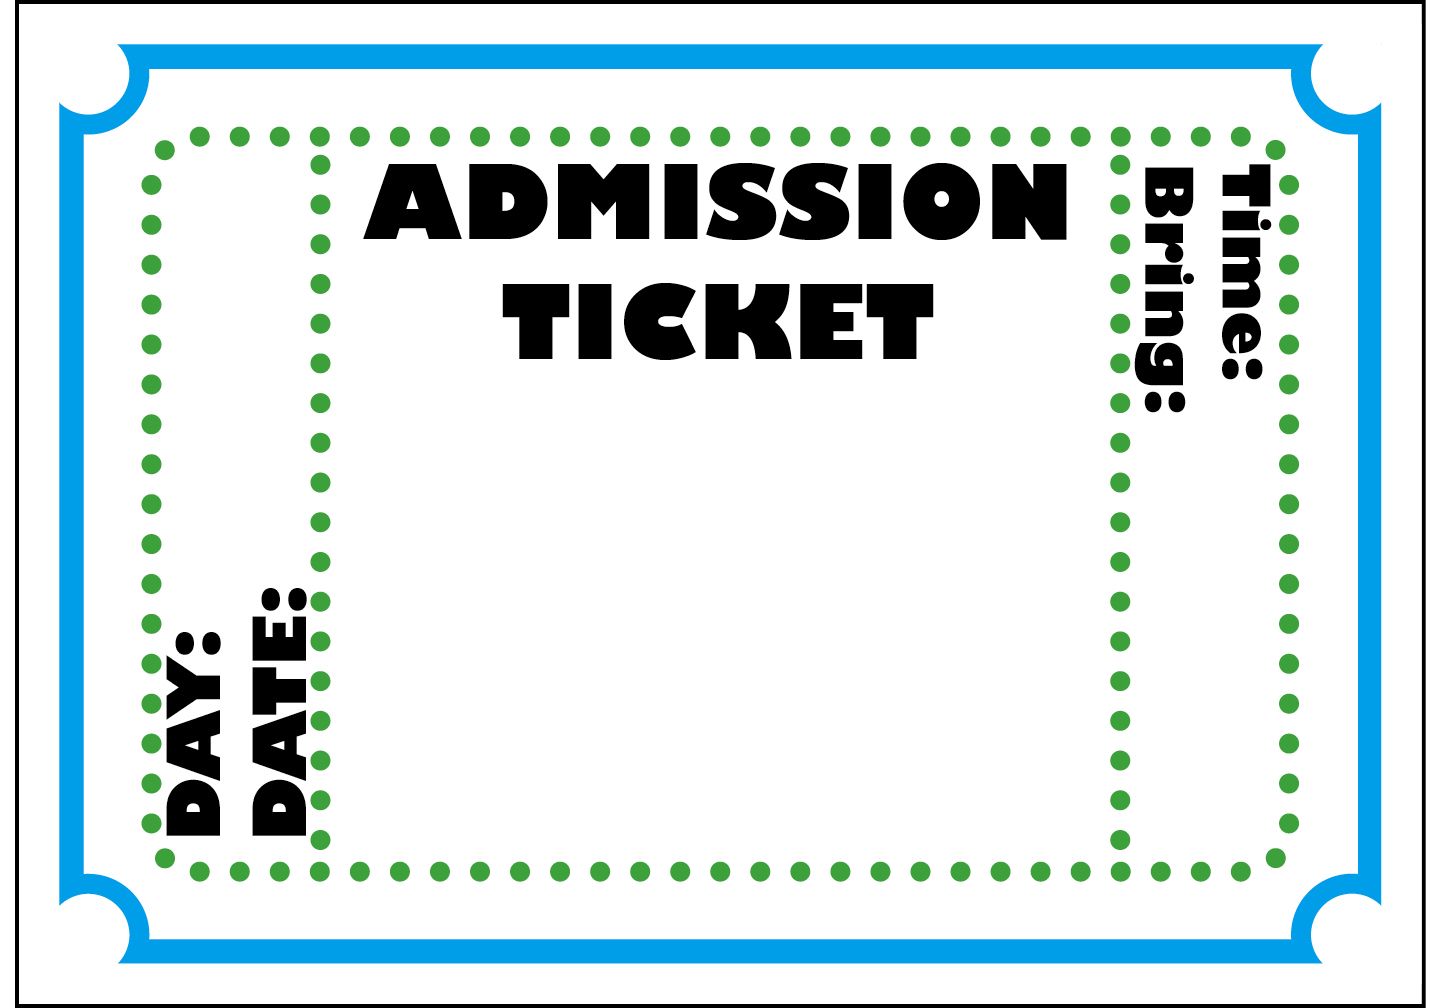 Concert clipart admission ticket. Mormon share a big